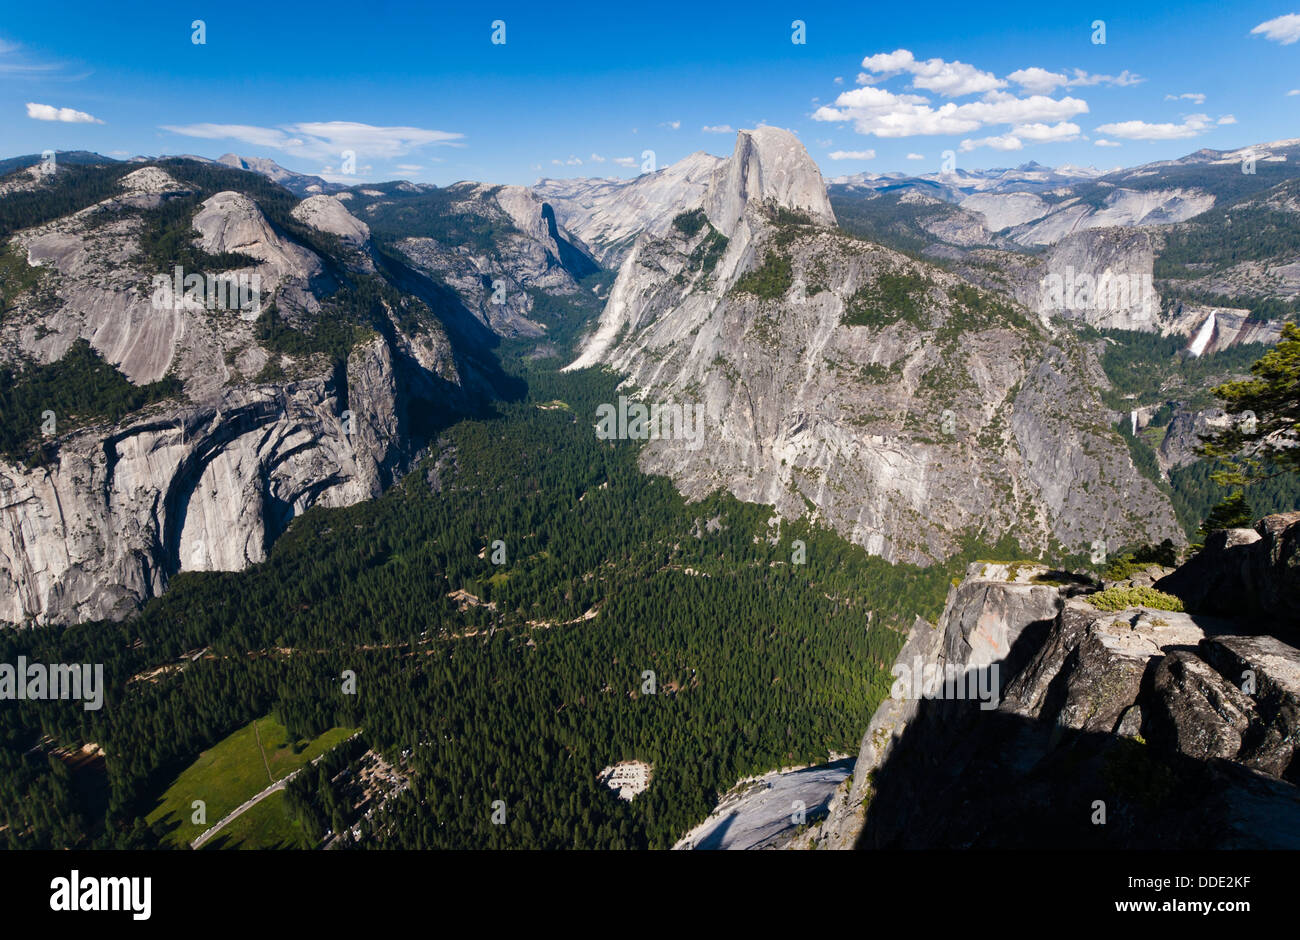 View over Yosemite Valley and Half Dome from Glacier Point. Yosemite National Park, California, USA. Stock Photo